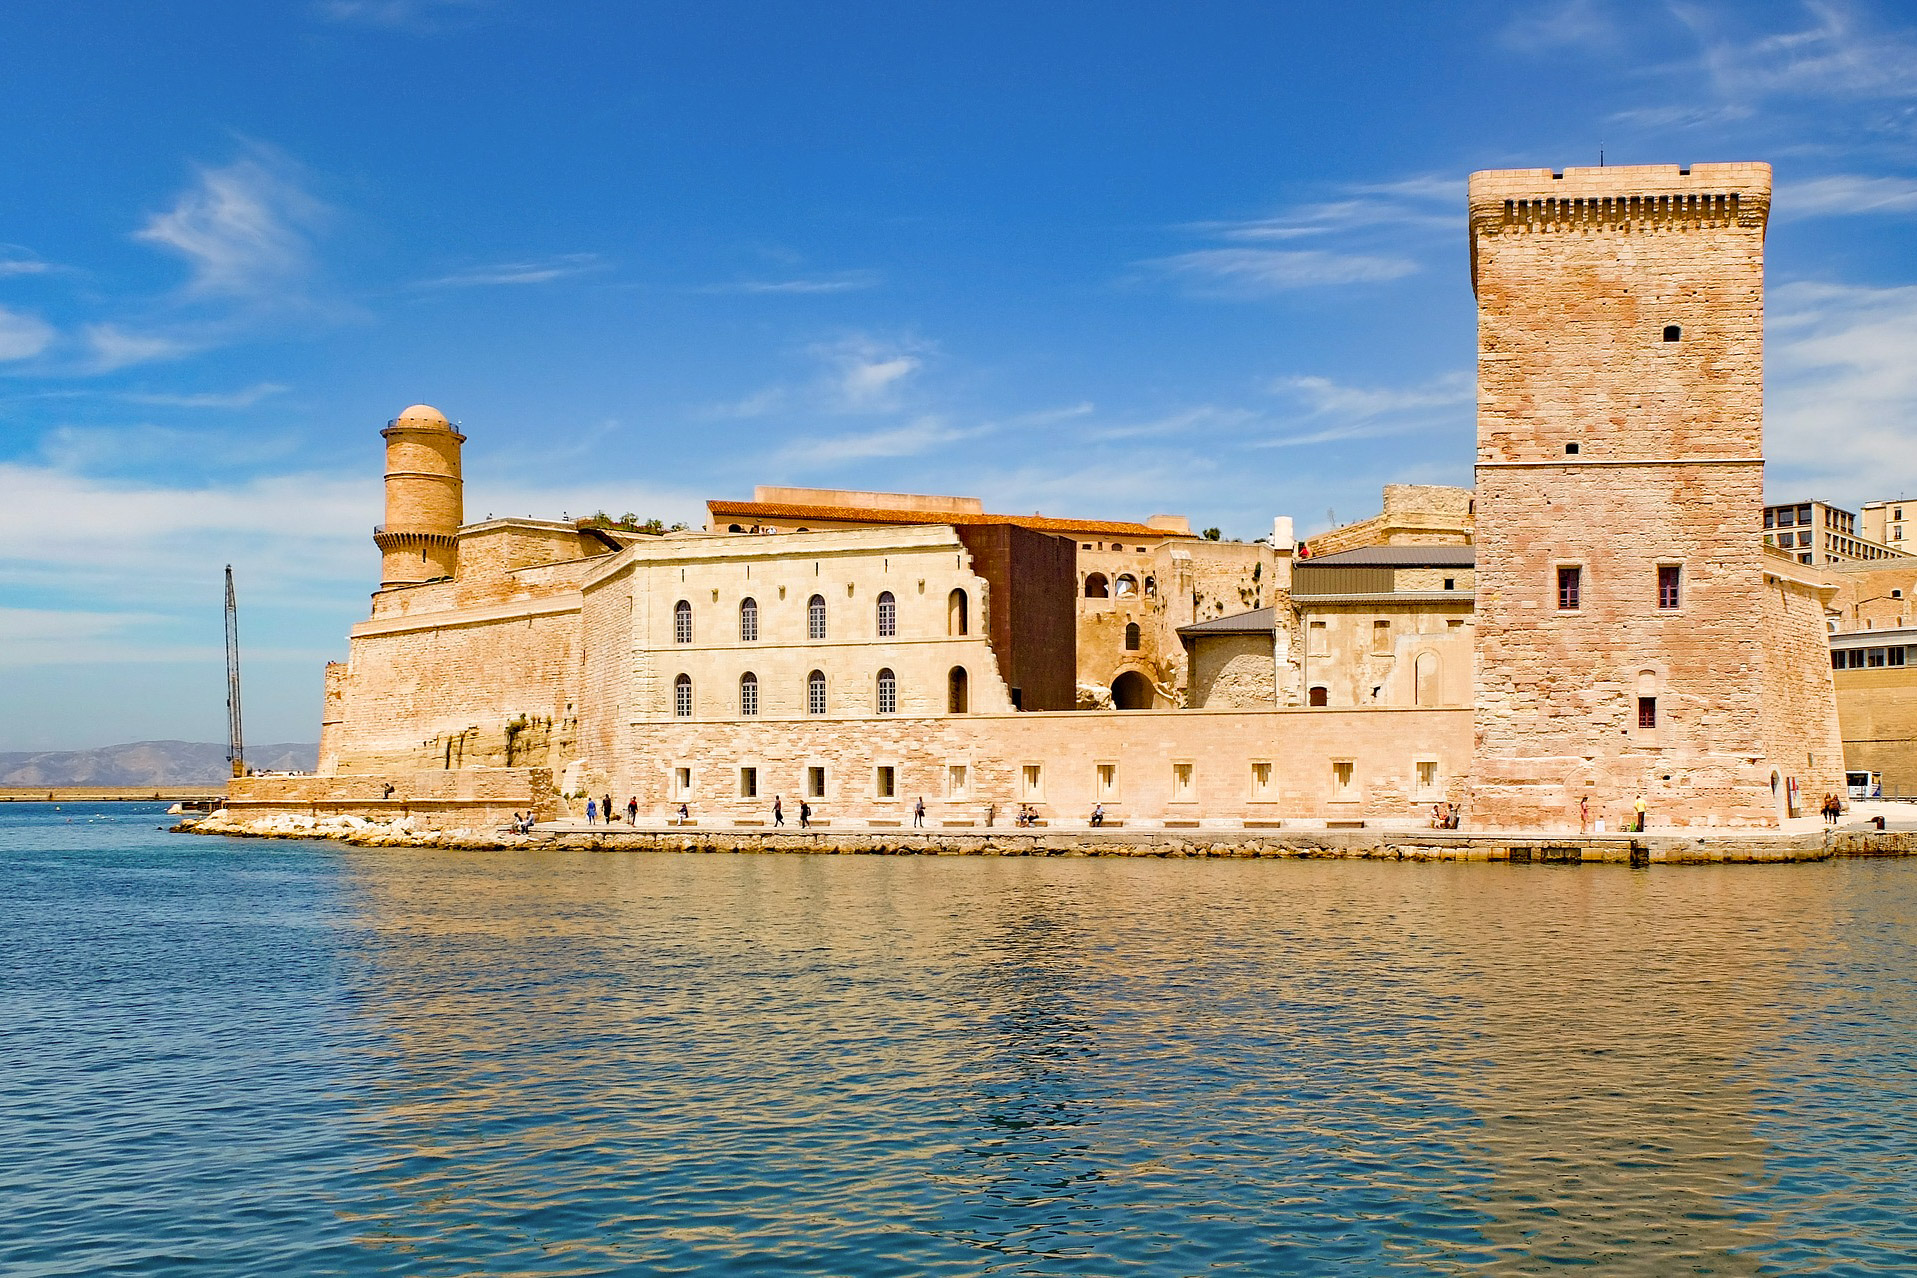 The Ultimate French Revolution Road Trip Fortress Fort Saint Jean In Marseille2754323 1920 (1)